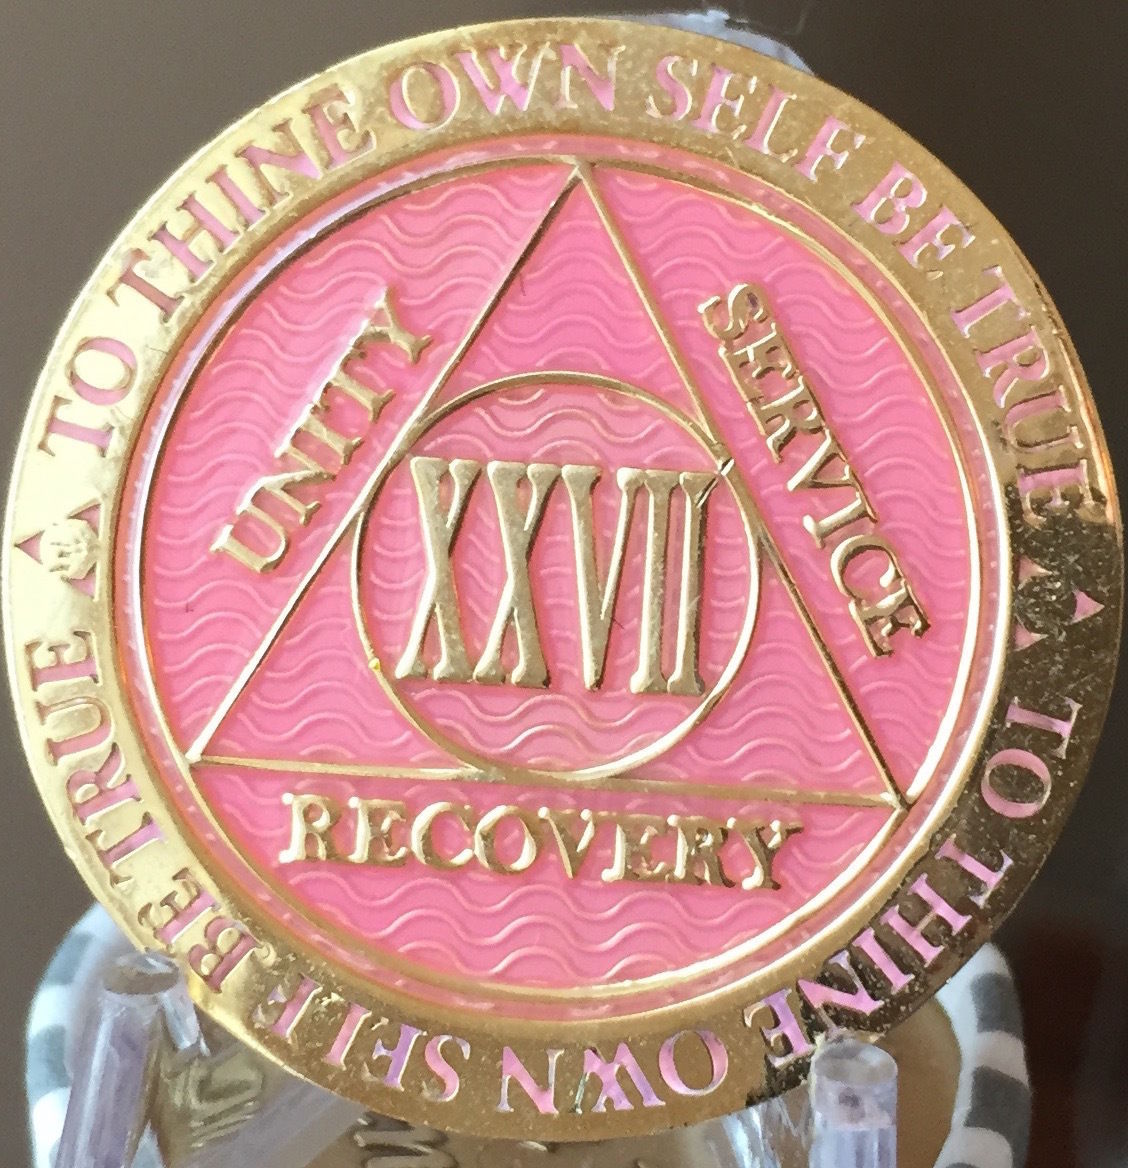 Primary image for 27 Year AA Medallion Pink Gold Plated Alcoholics Anonymous Sobriety Chip Coin 